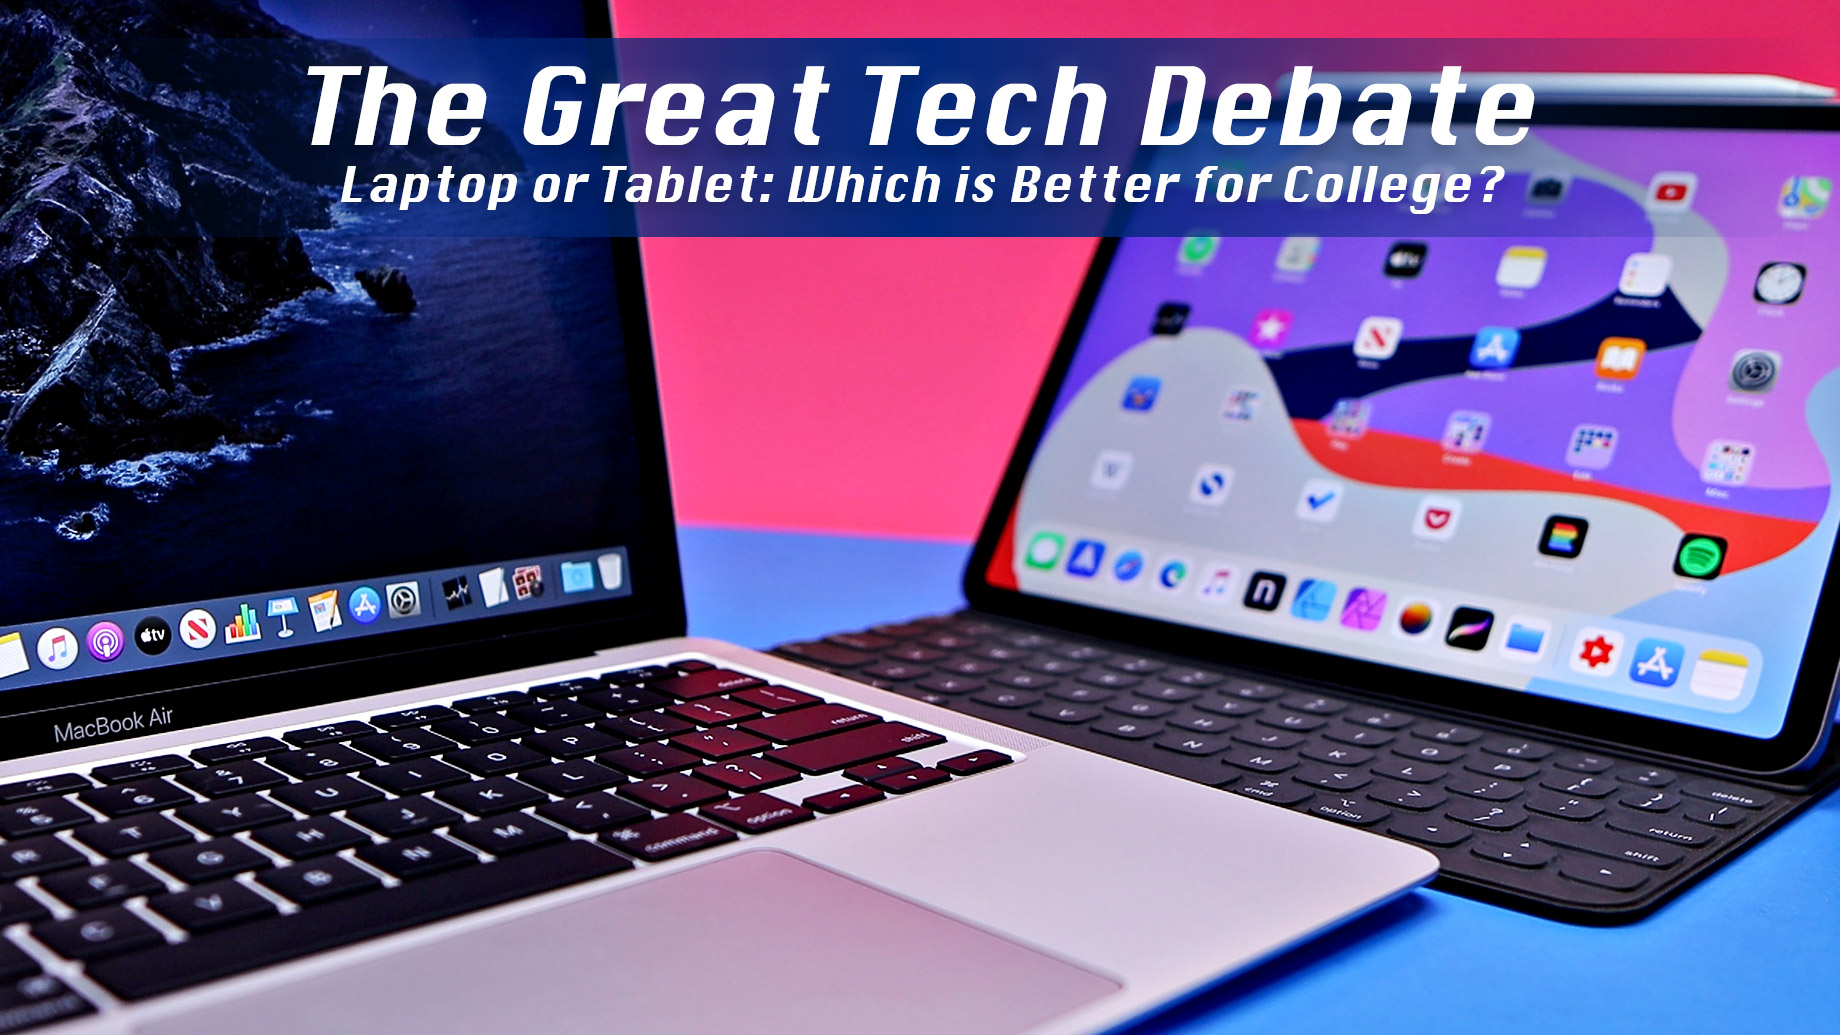 The Great Tech Debate - Laptop or Tablet: Which is Better for College?